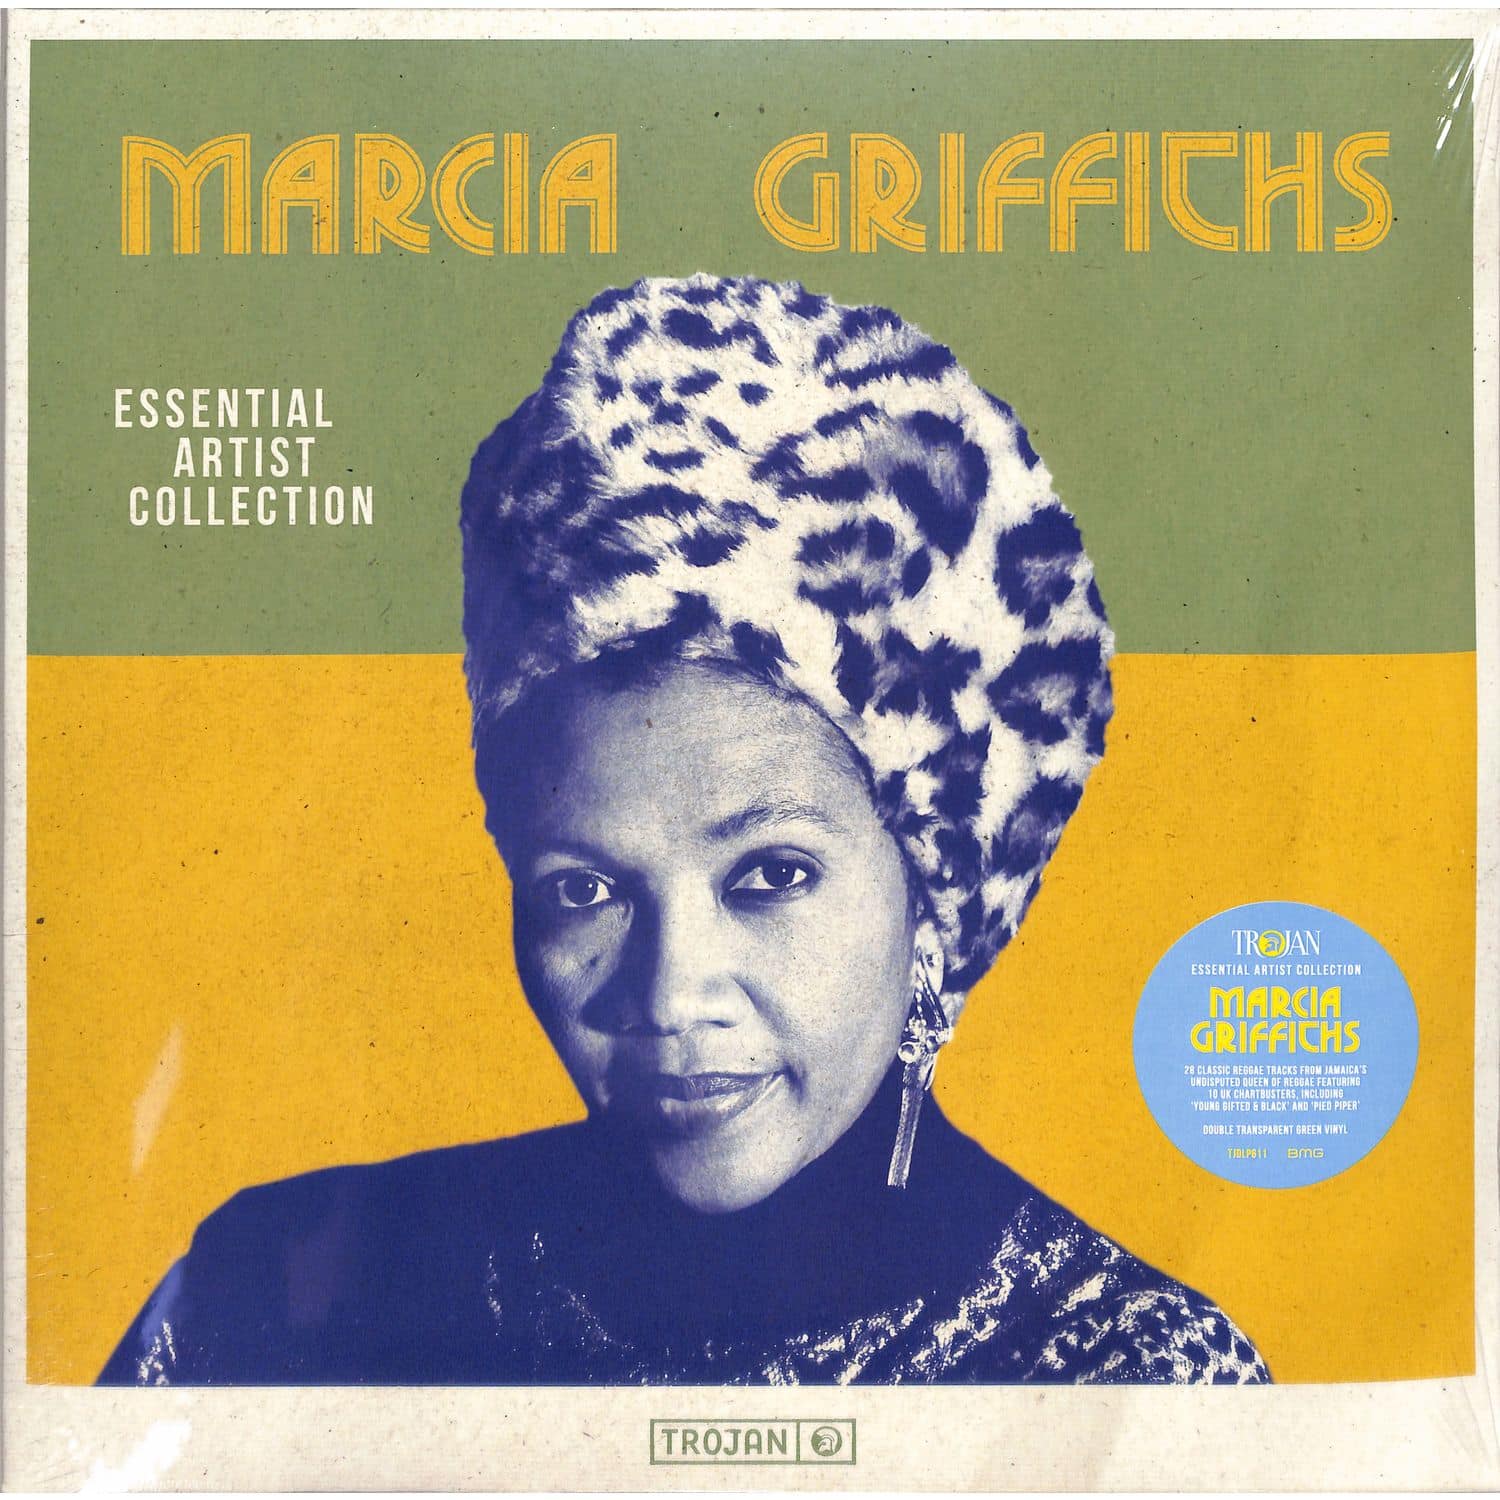 Marcia Griffiths - ESSENTIAL ARTIST COLLECTION-MARCIA GRIFFITHS 